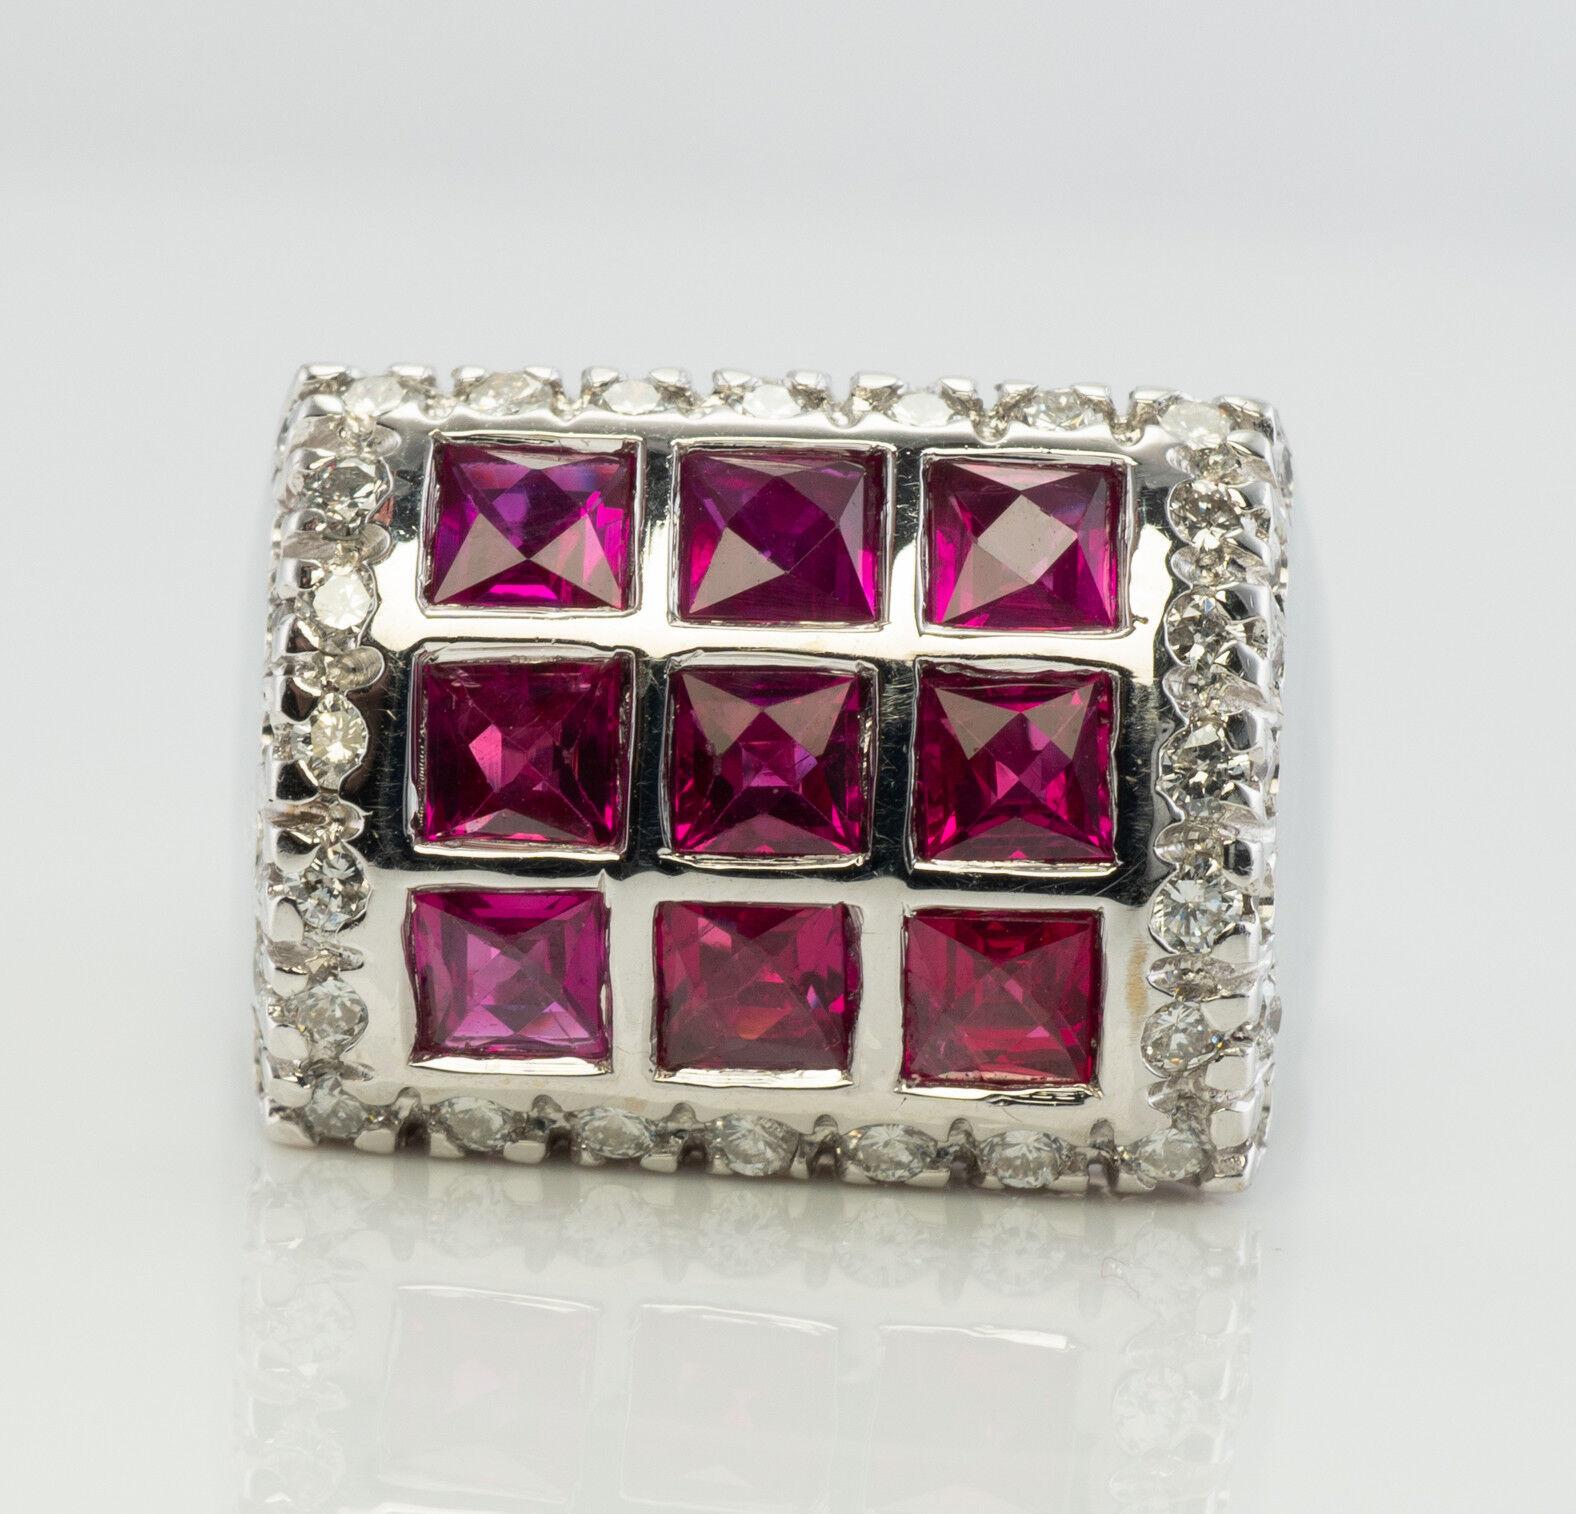 This gorgeous estate ring is finely crafted in solid 18K White Gold and set with high quality lab-created Rubies and Diamonds. Nine square cut Rubies measure 3mm for the grand total 1.44 carats. These gems are very clean and transparent, wh a great